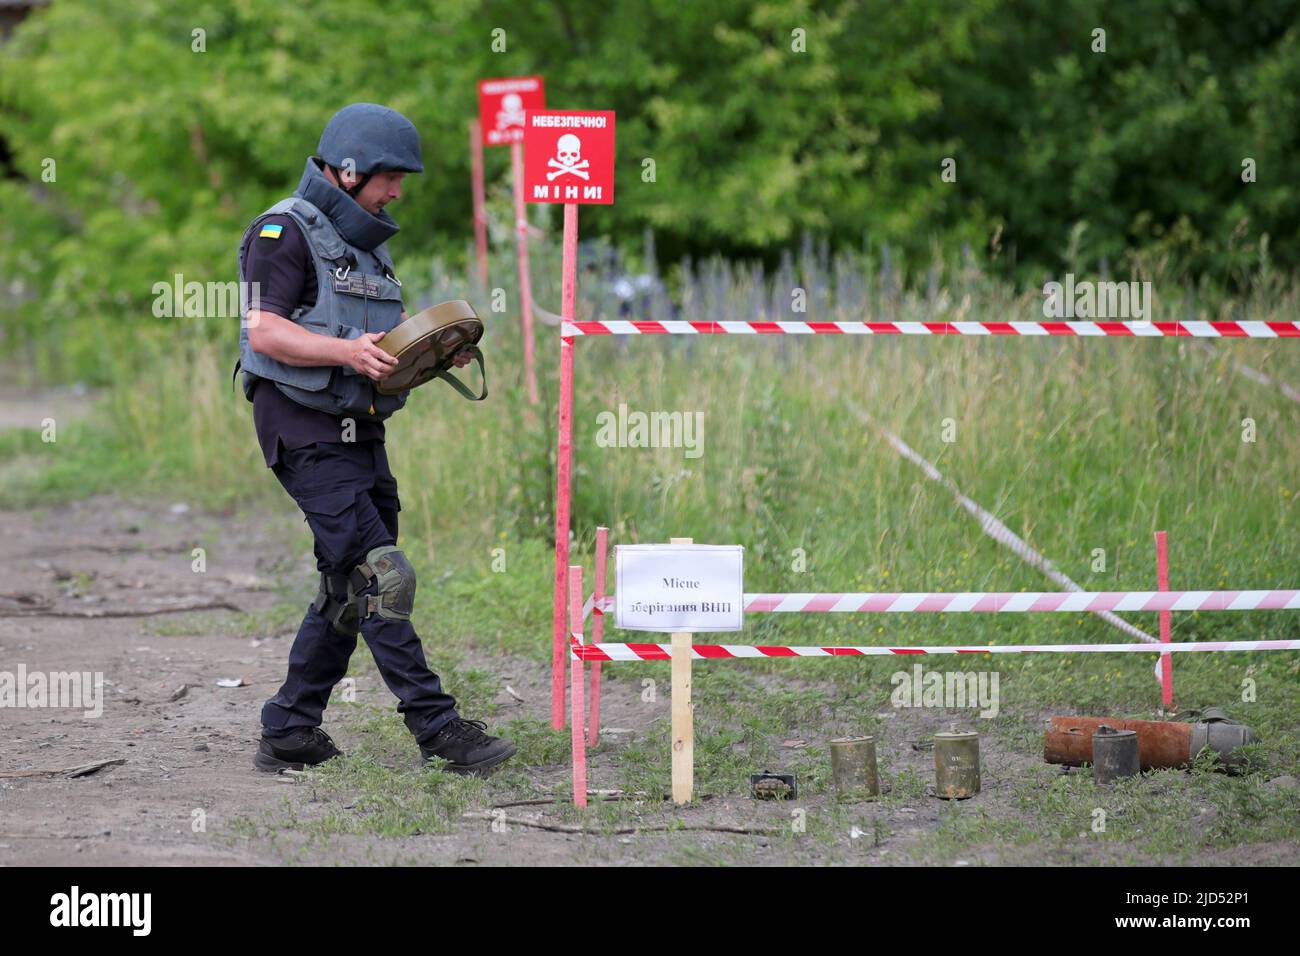 TROSTIANETS, UKRAINE - JUNE 17, 2022 - A rescuer carries a land mine on the premises of a brick plant where lots of ammunition and other explosive ite Stock Photo